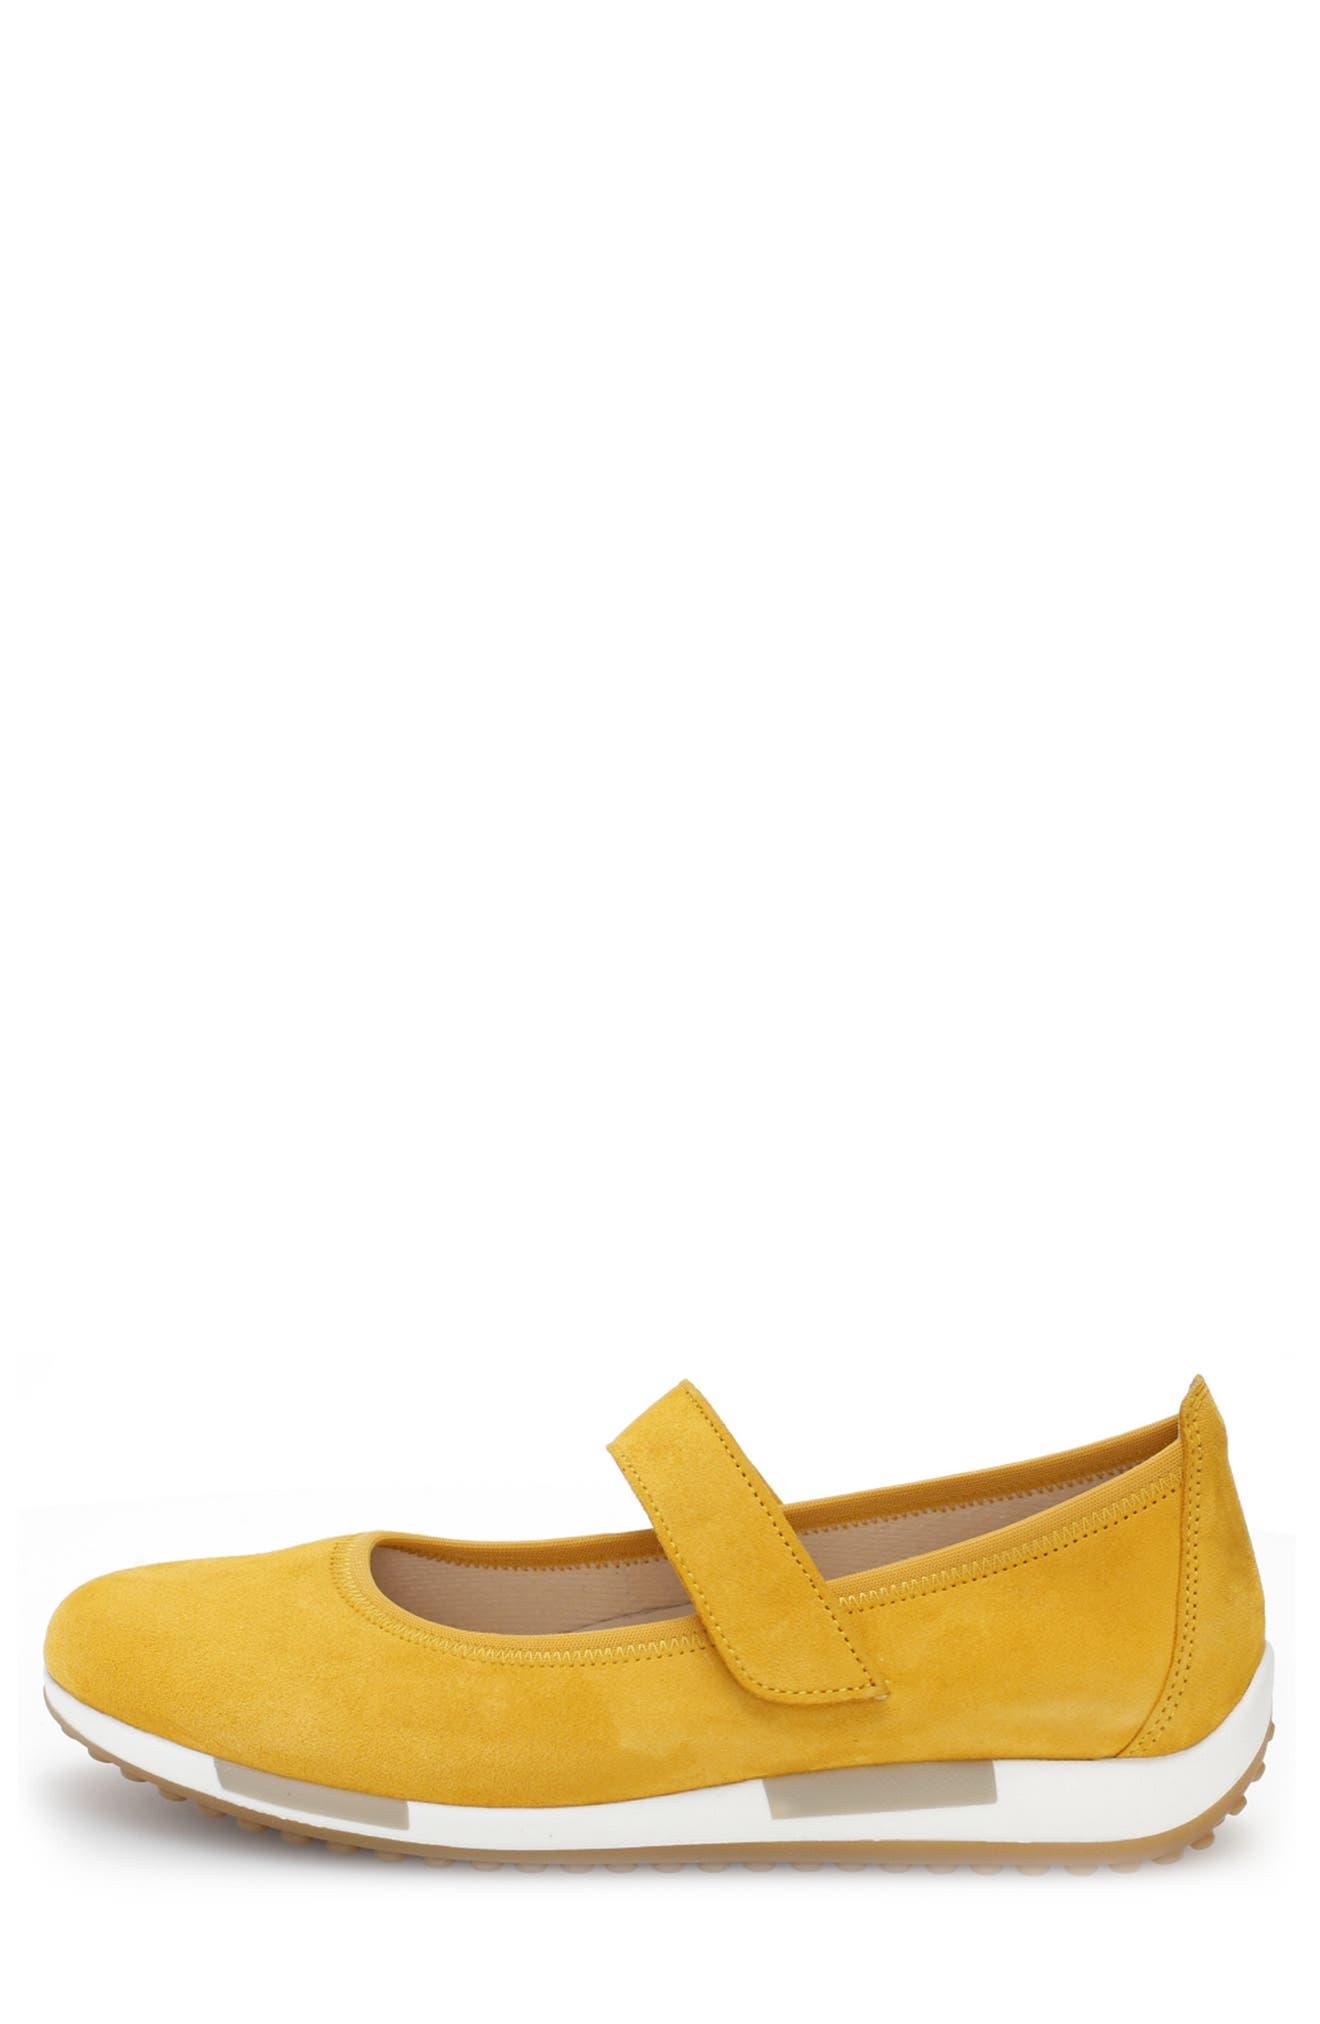 Gabor Mary Jane Flat In Yellow At Nordstrom Rack | Lyst